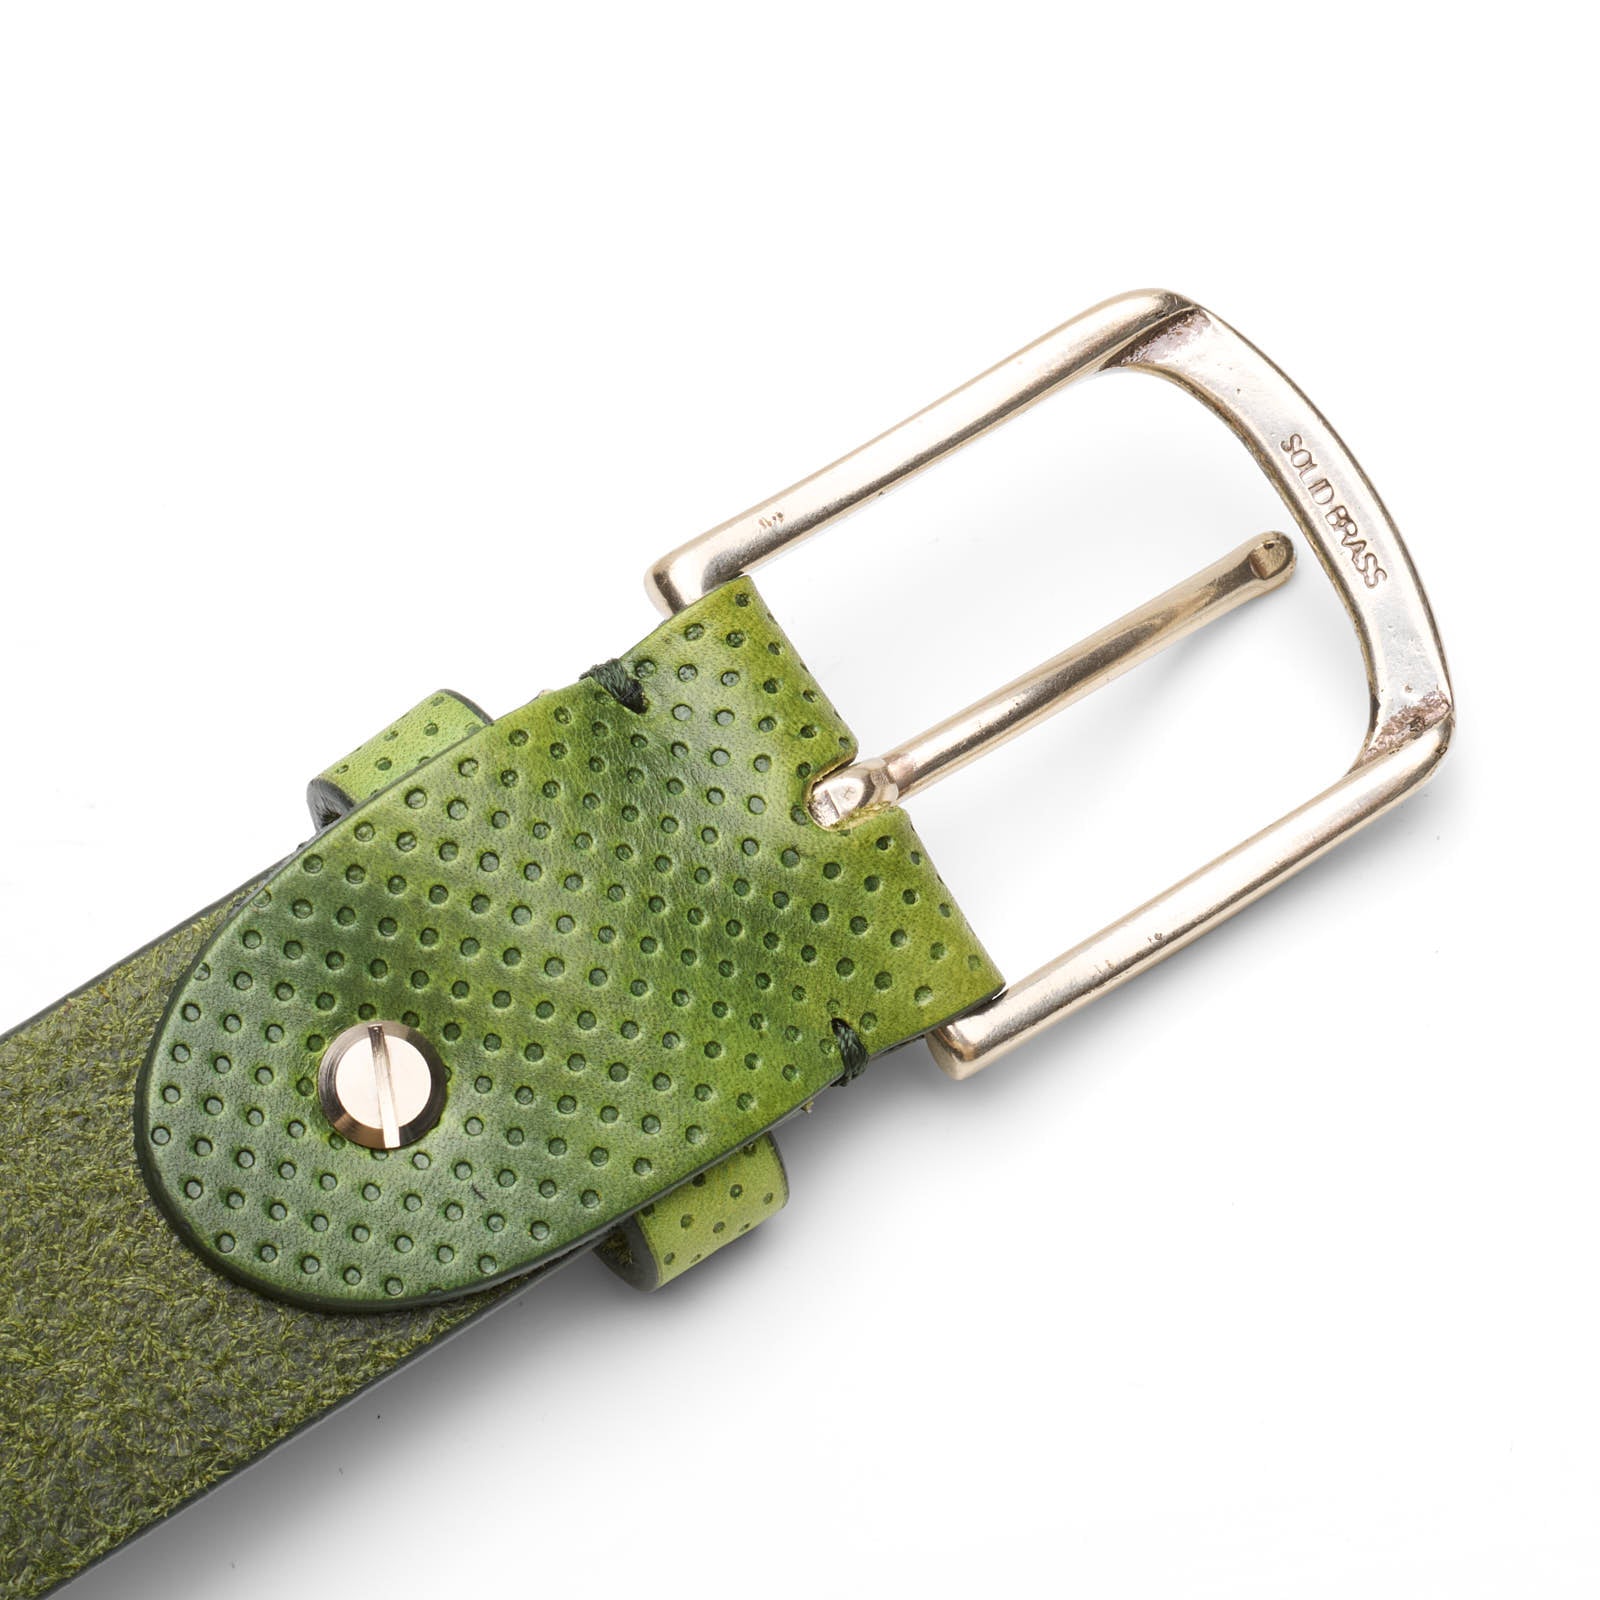 PAOLO VITALE Handmade Green Perforated Leather Silver-Tone Buckle Belt